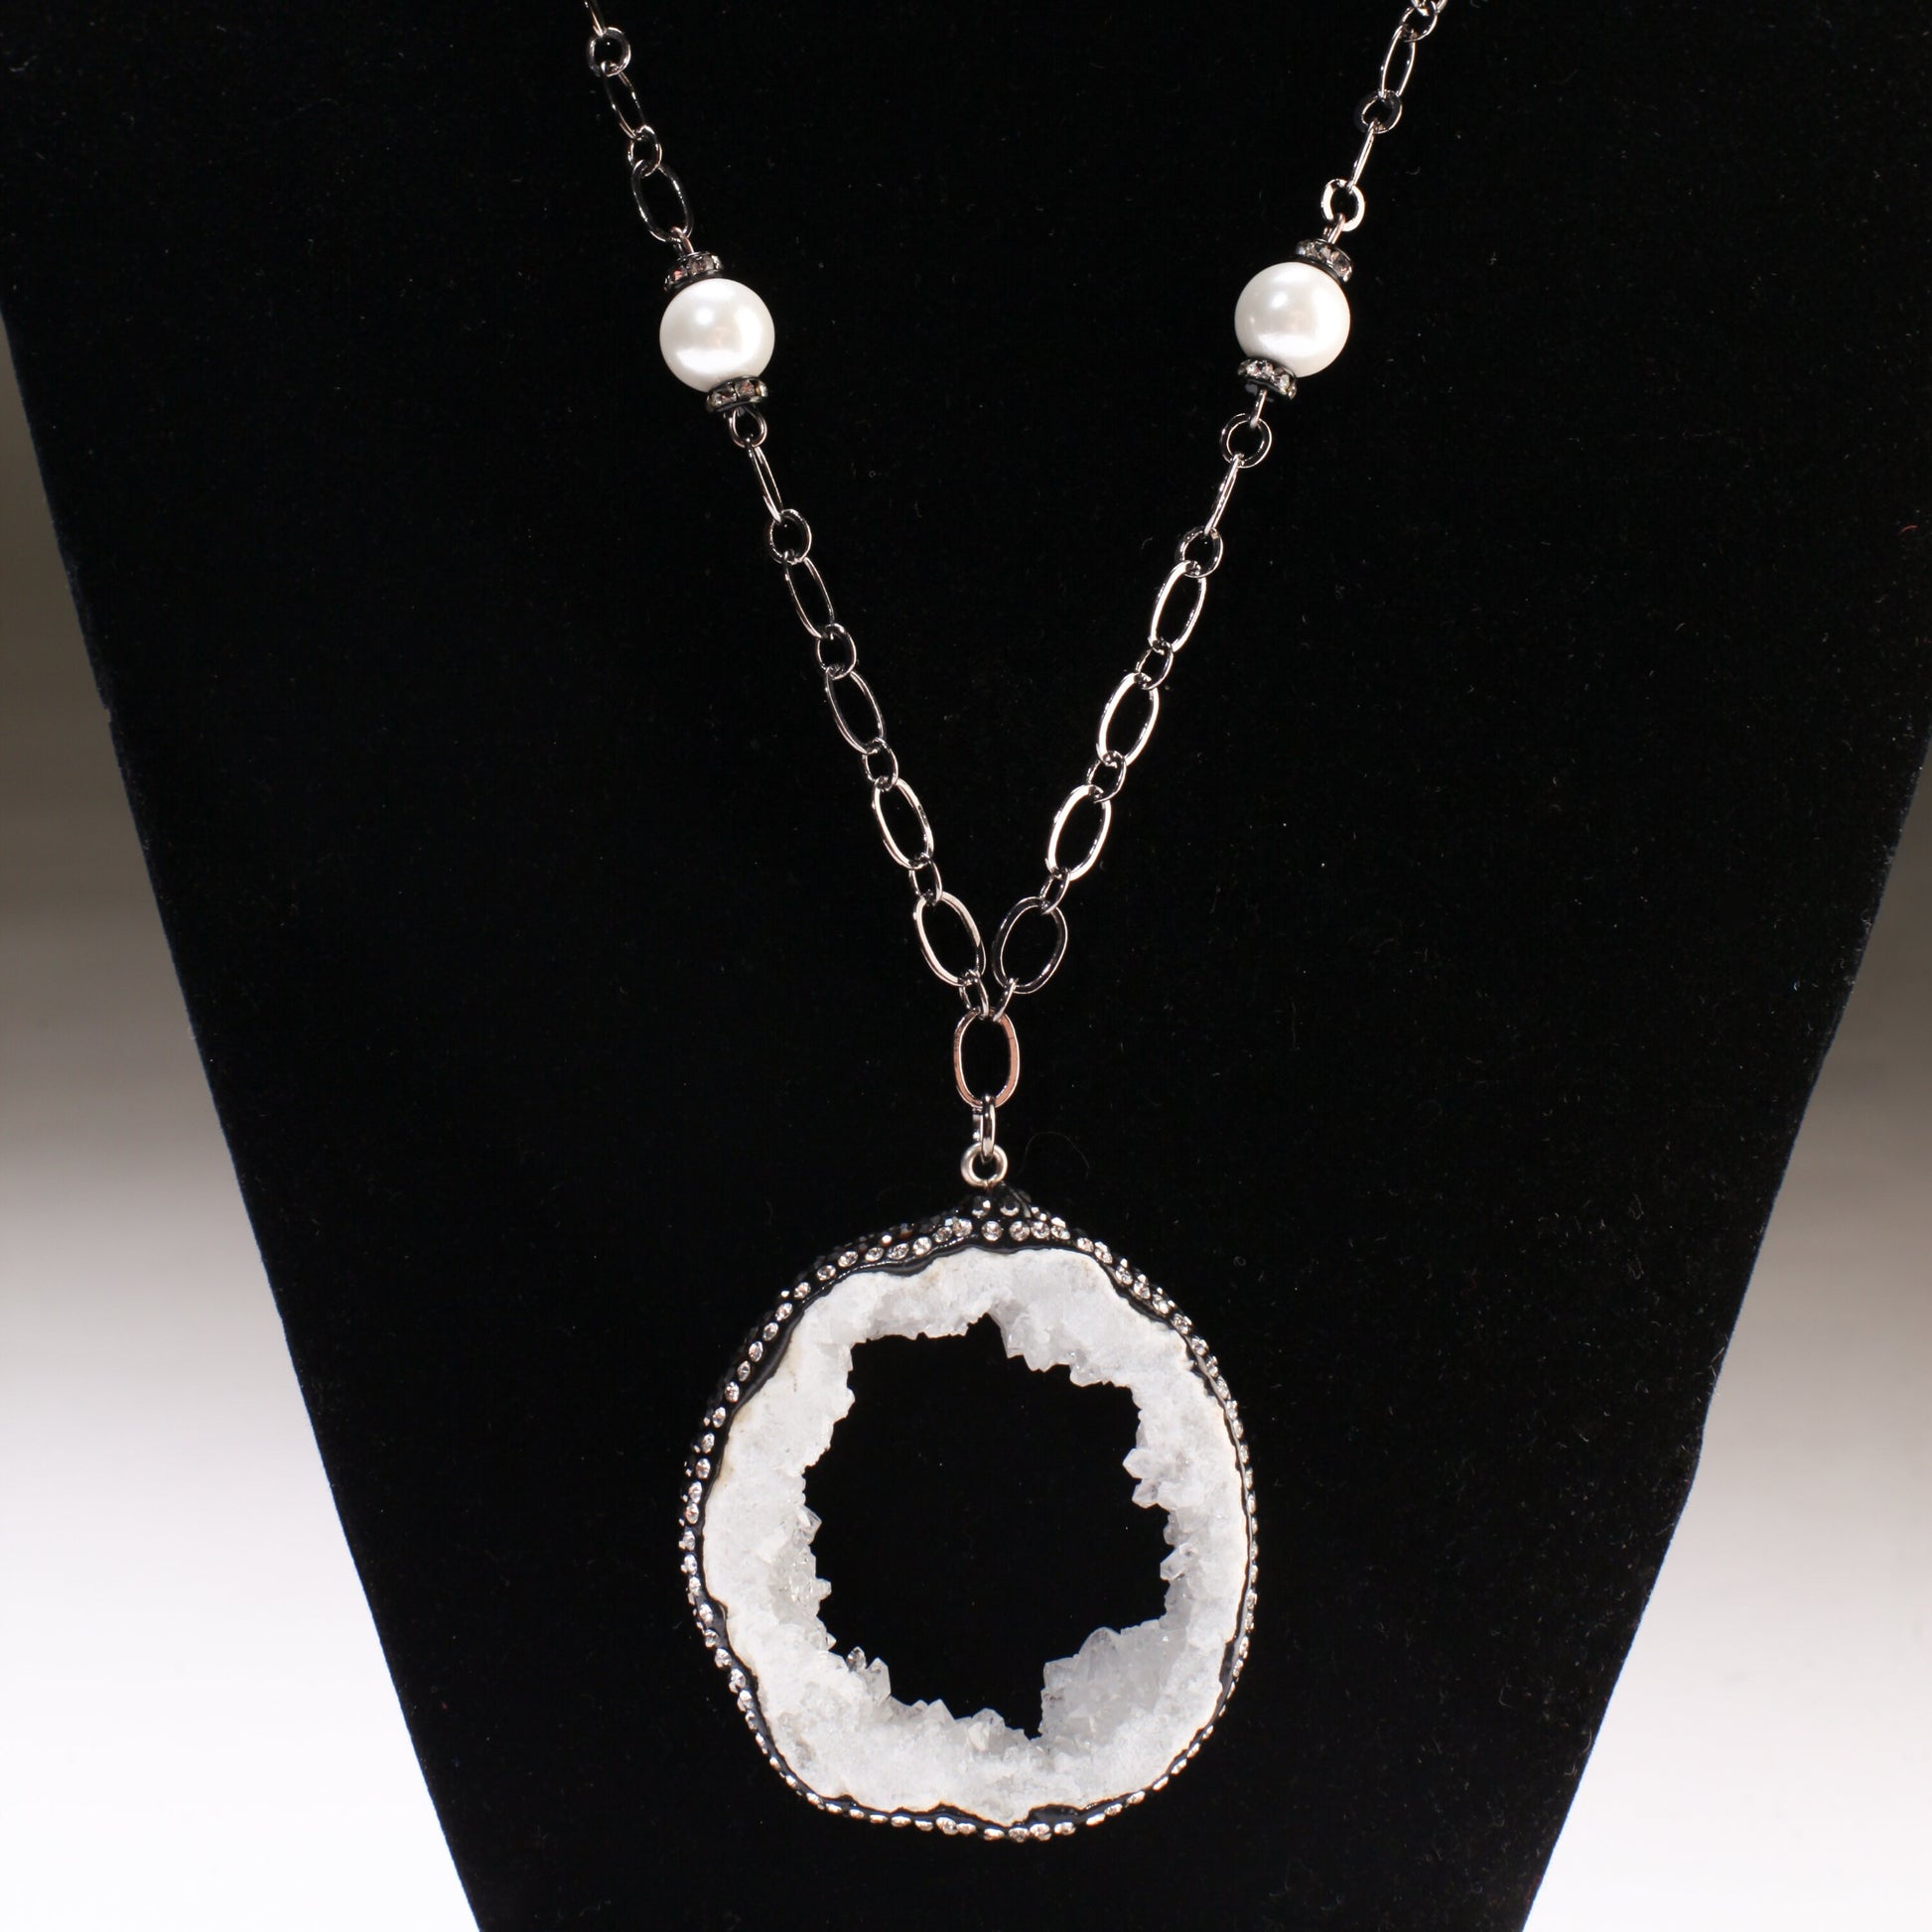 White Druzy Agate, Geod Pendant 53x47mm, CZ Rhinestone Pave, Accent with 10mm South Seashell Pearl 20.5" gunmetal oxidized Necklace